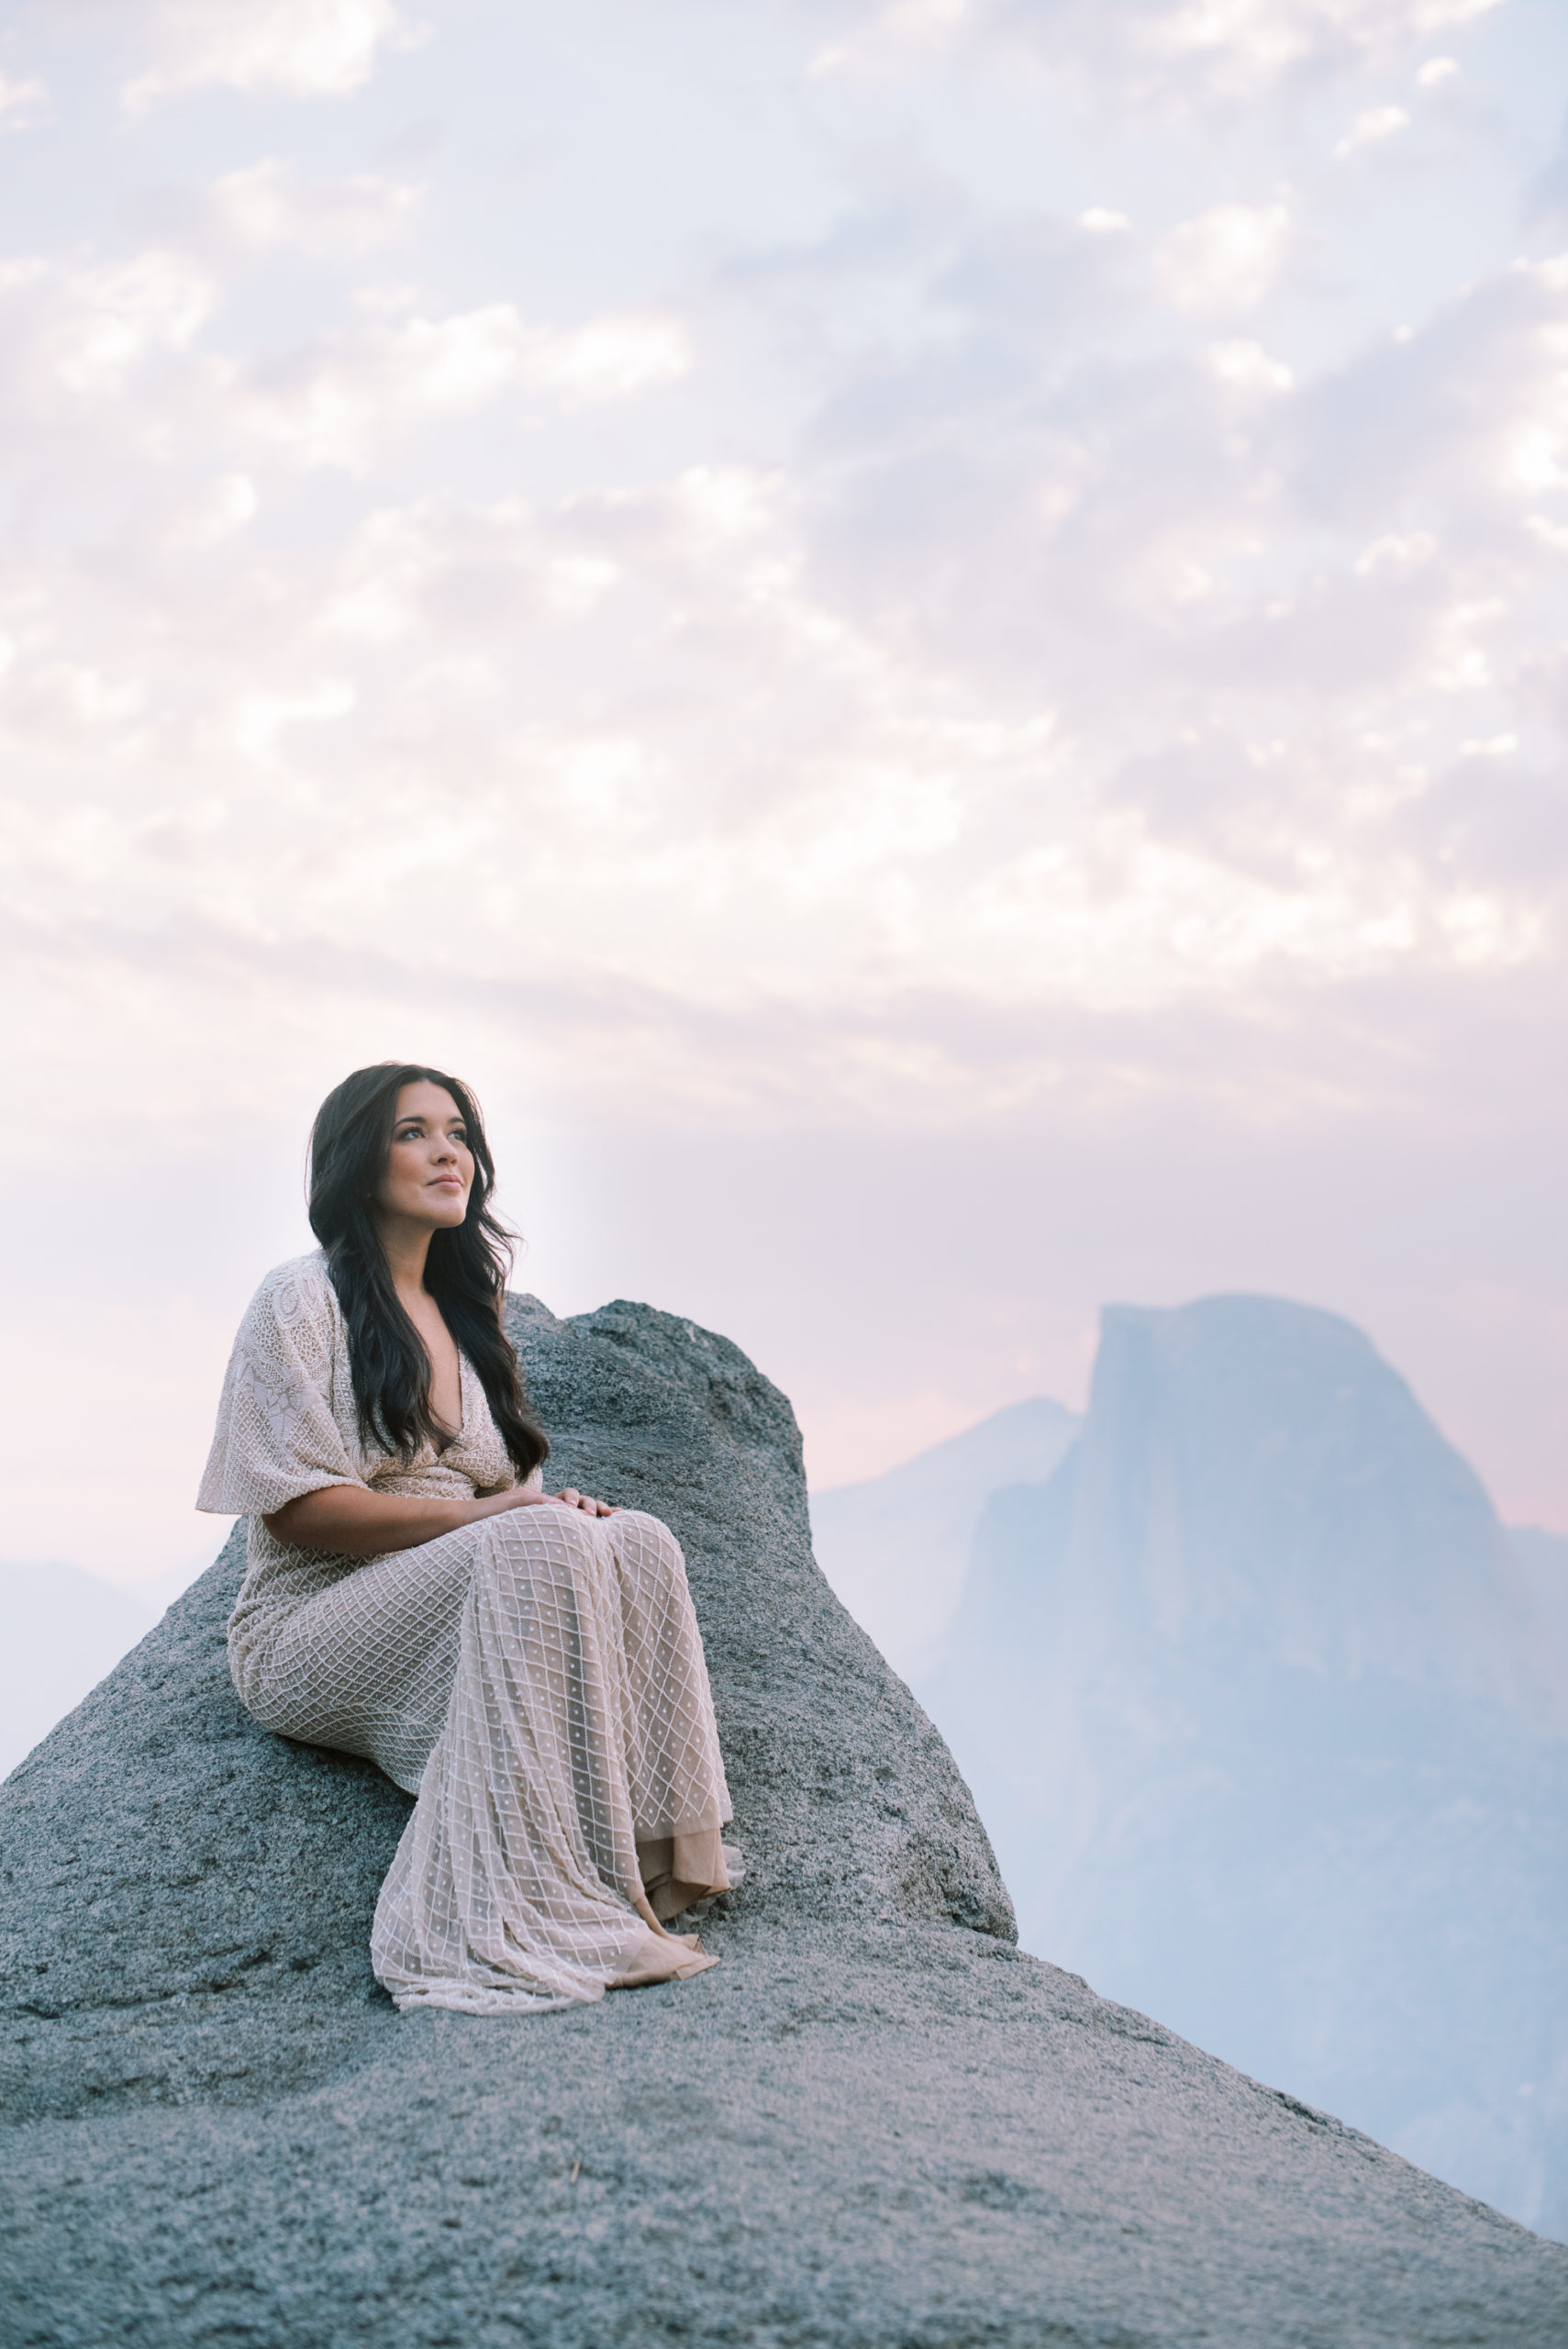 Bridal Session at Yosemite National Park - Bride sitting on a rock at Glacier Point with Half Dome in the background at sun rise

